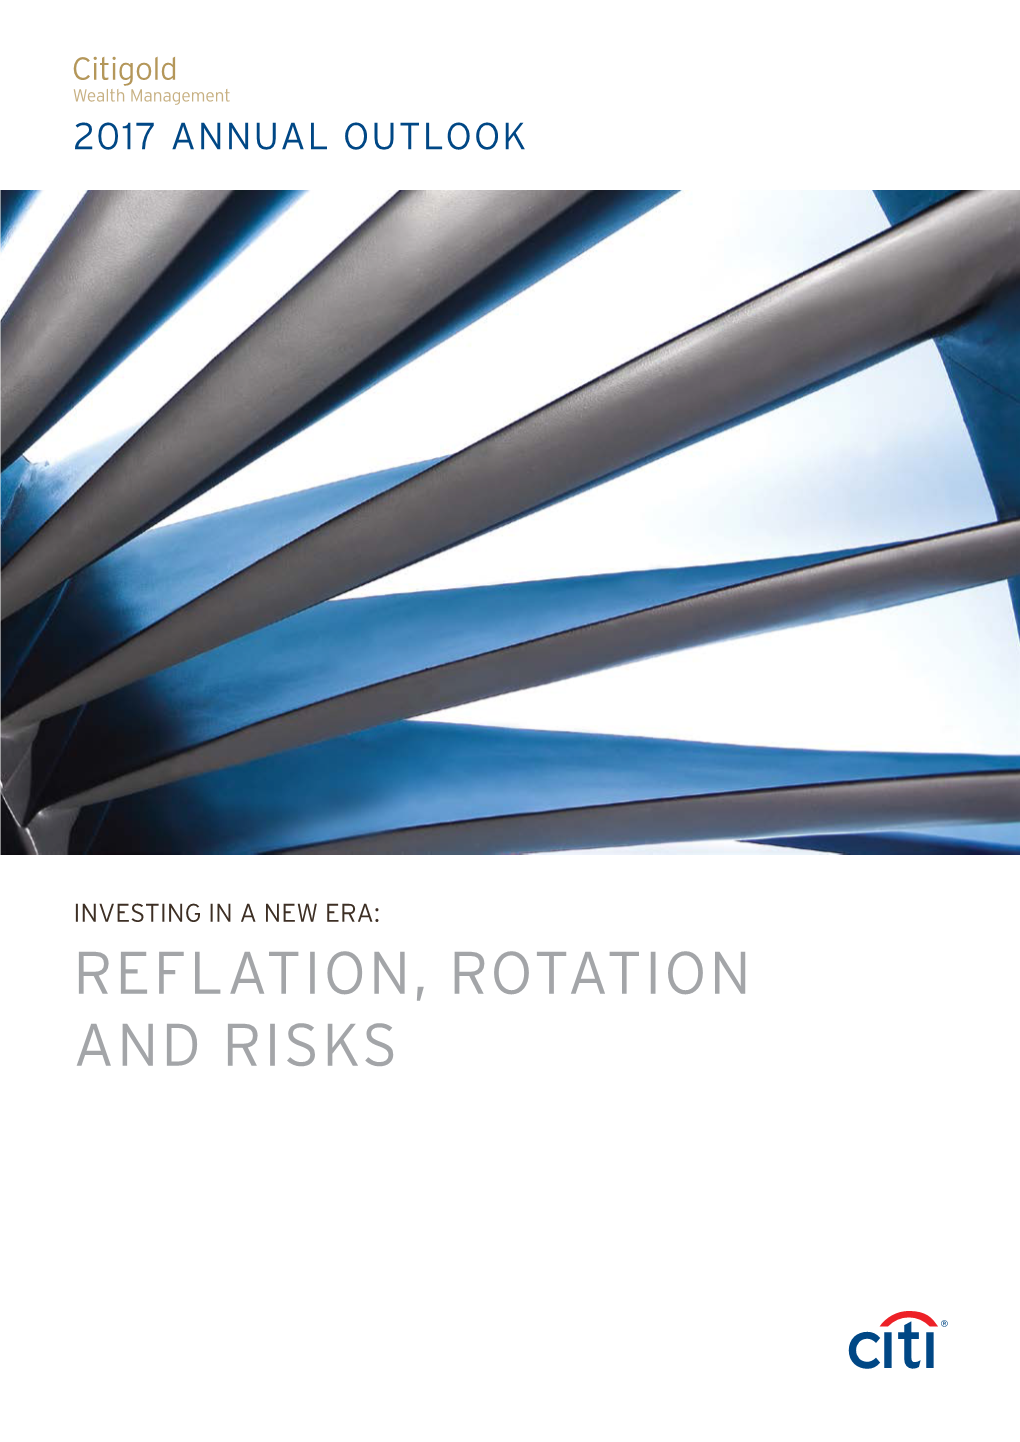 Reflation, Rotation and Risks 2017 Annual Outlook Contents